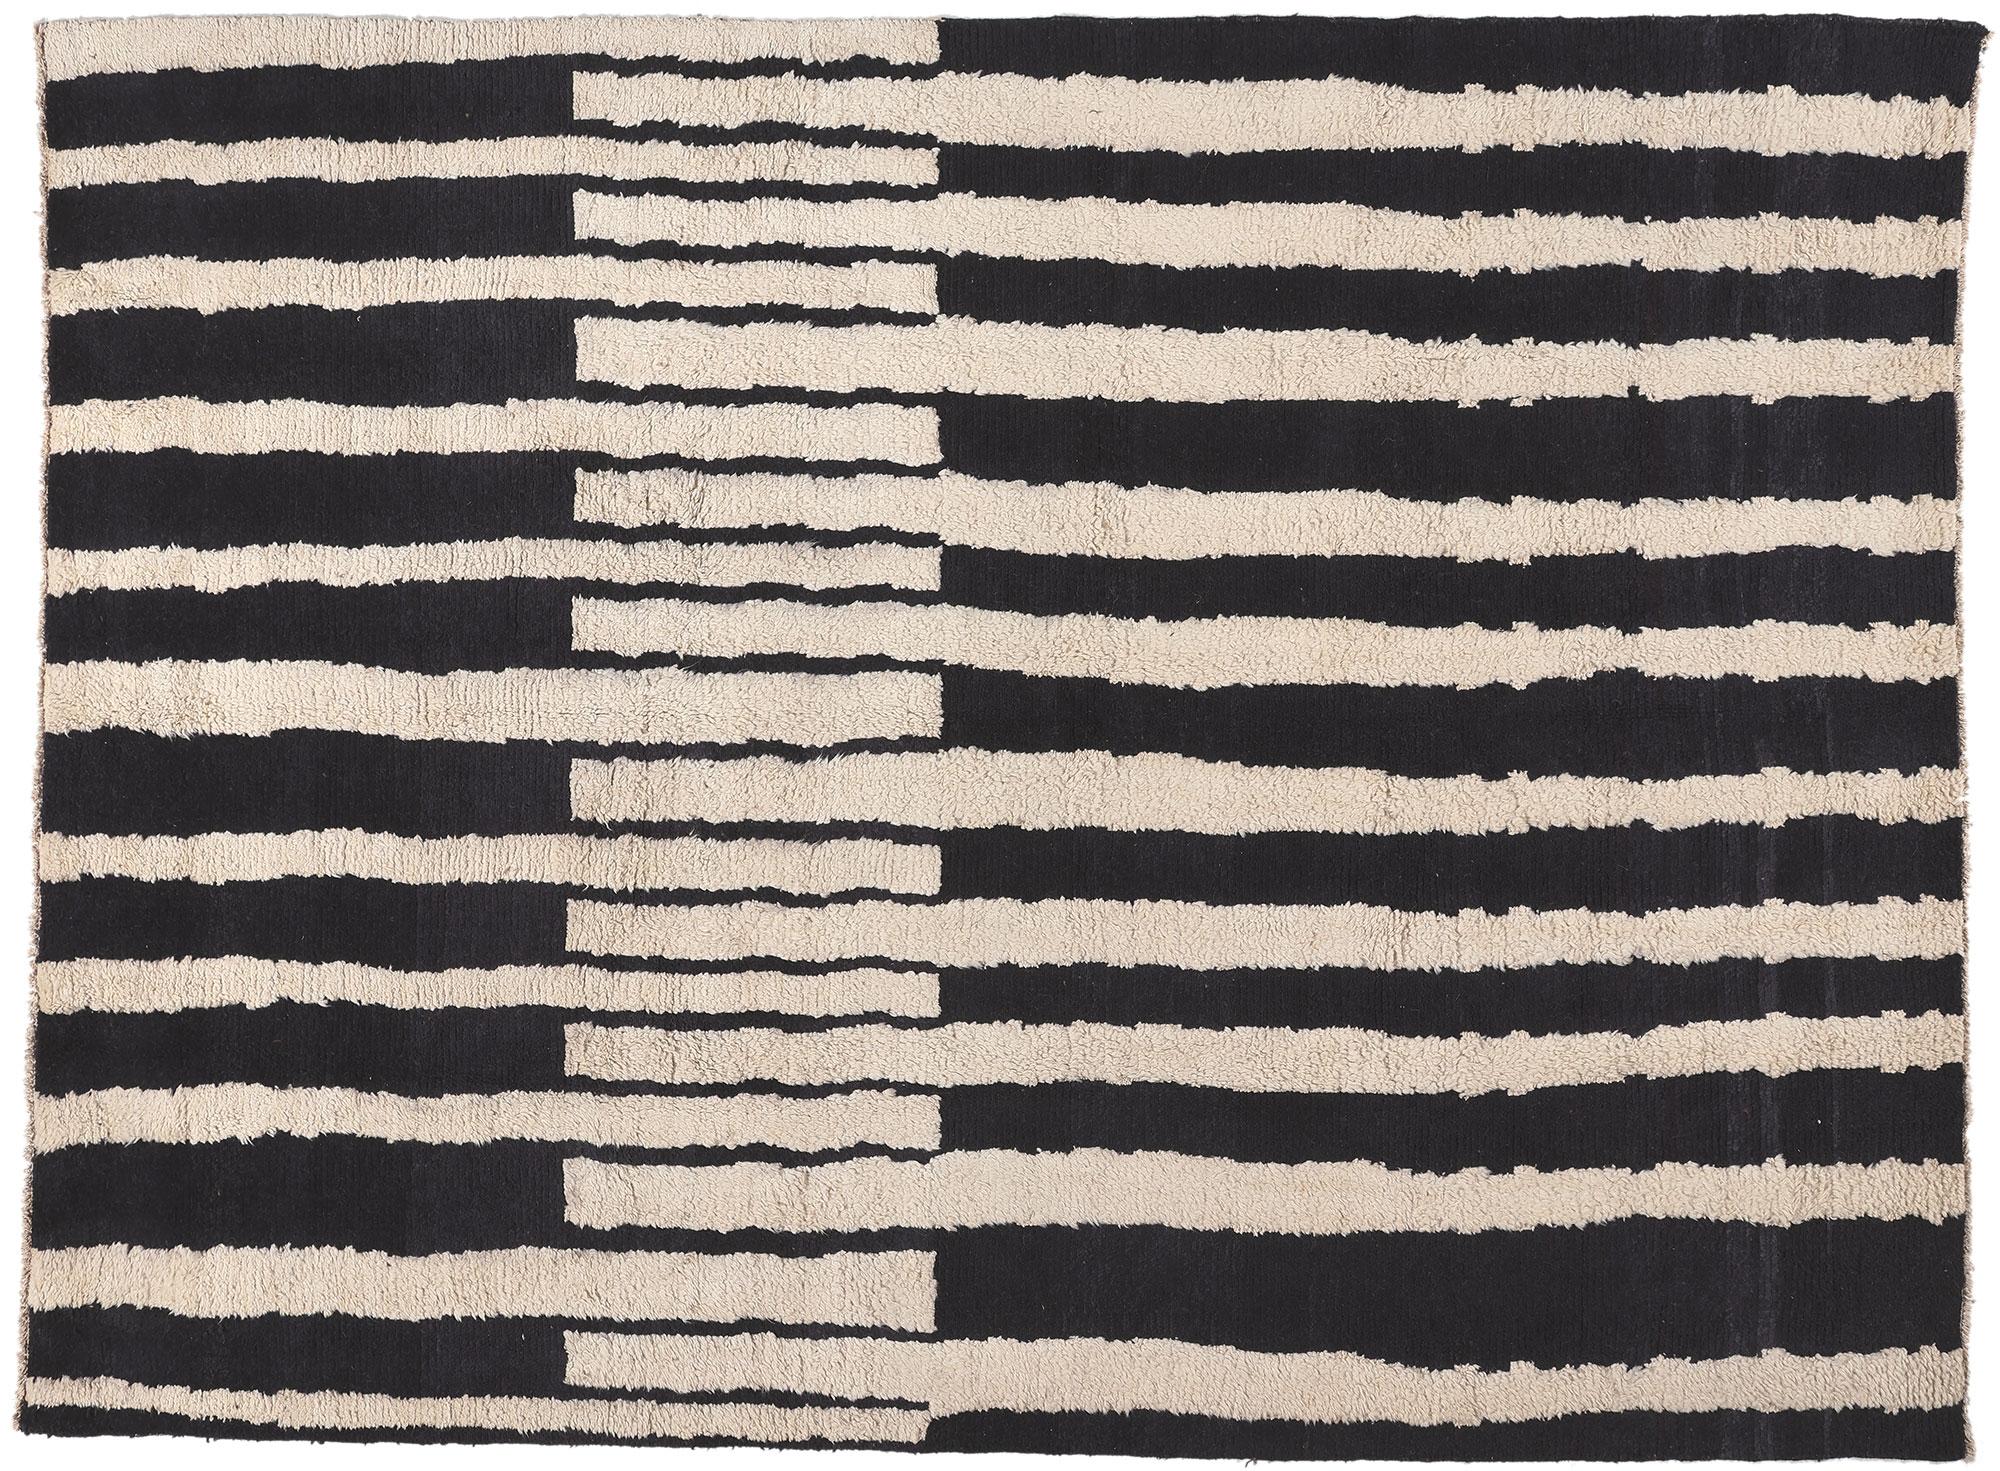 Pakistani Modern Moroccan Rug Inspired by Josef Albers with Holistic Bauhaus Design For Sale